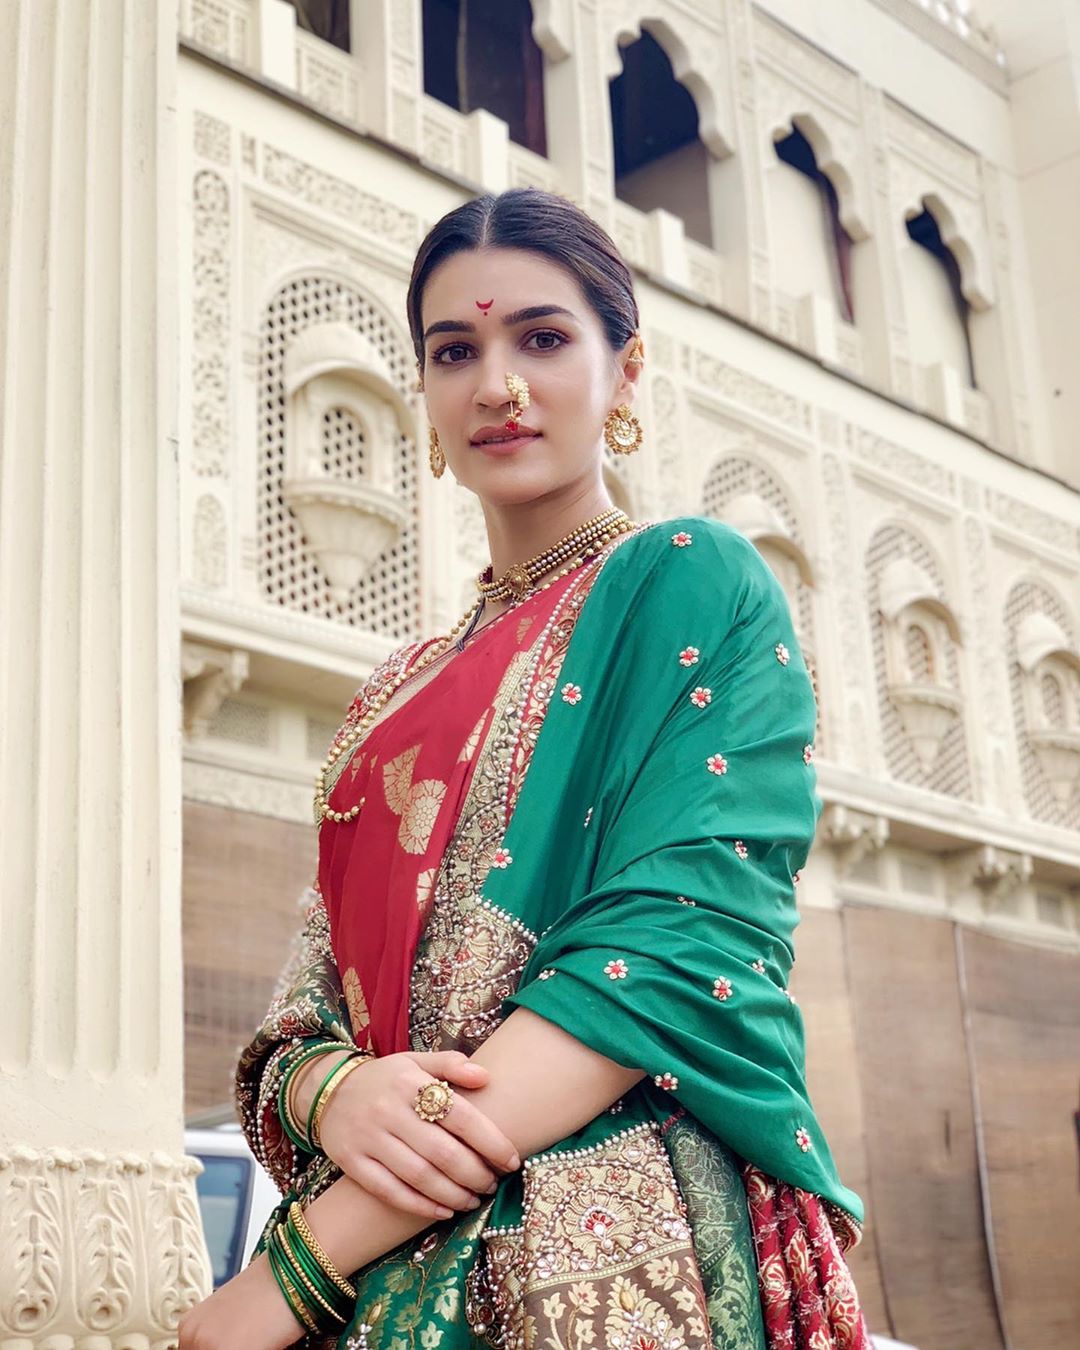 Kriti Sanon Admirers have a way of surprising our reality! proved us what she is capable of and what more she has. #ParvatiBai is your best work and